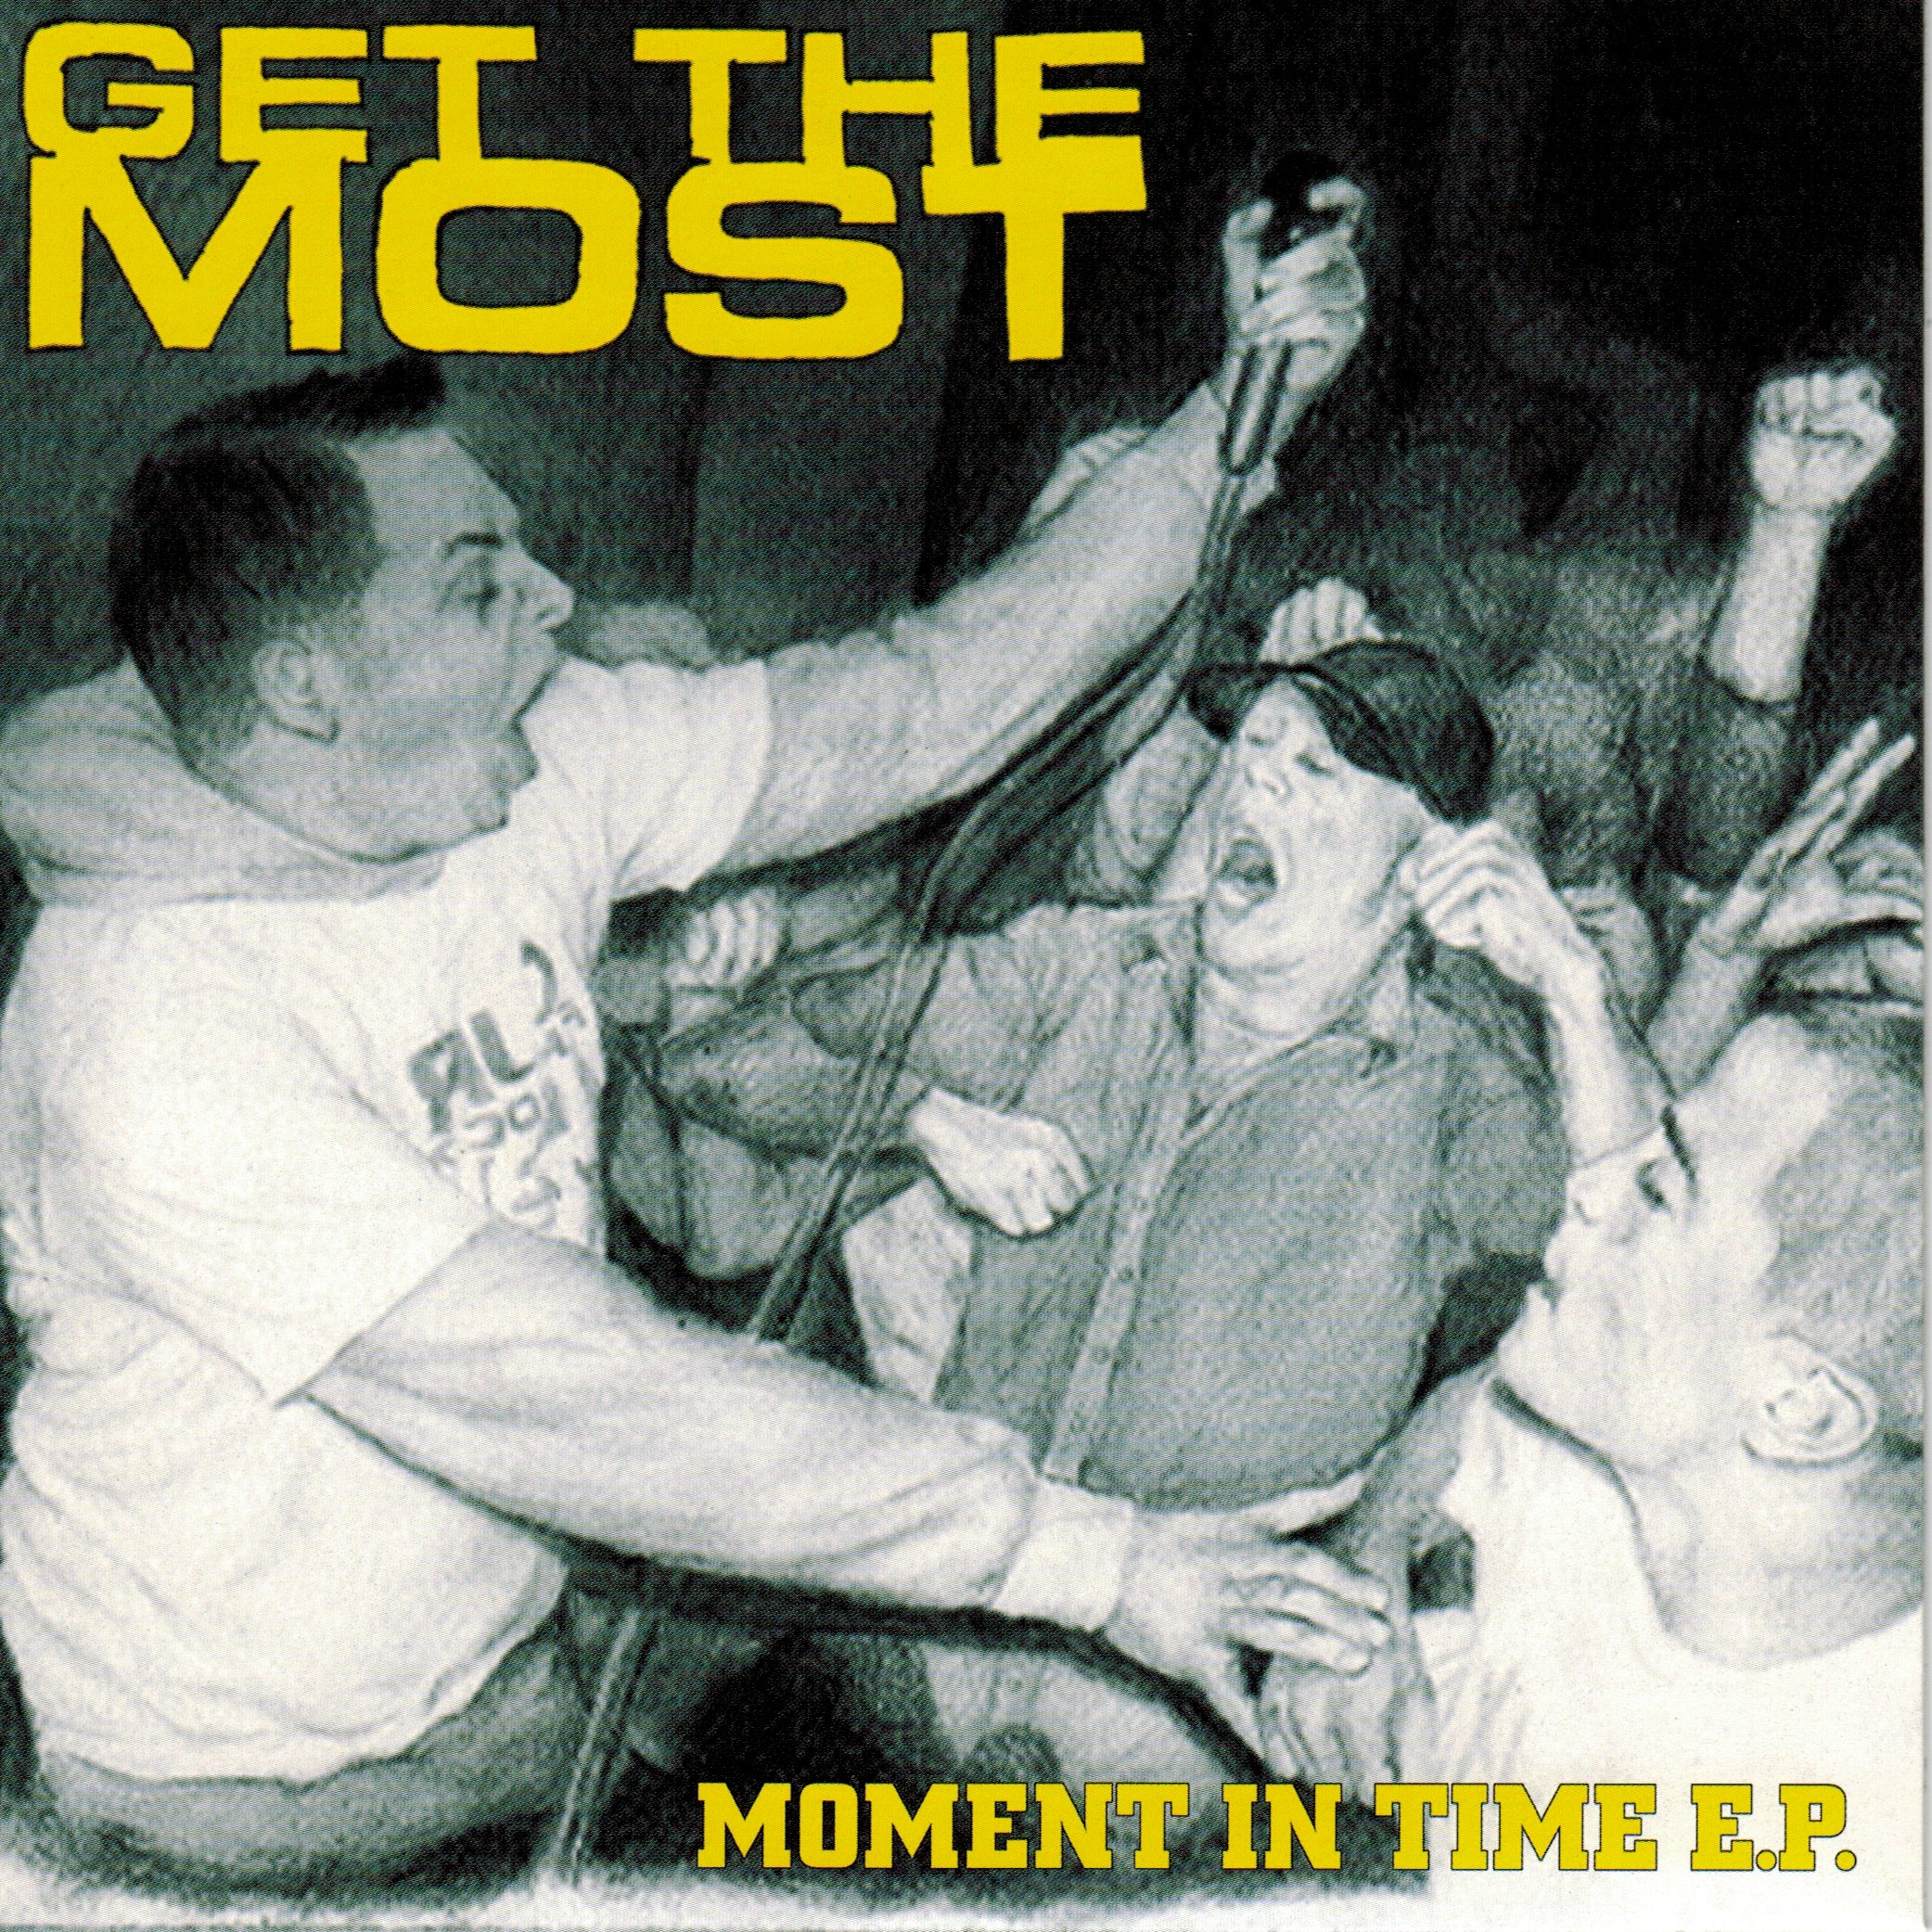 GET THE MOST 'Moment in Time' 7"